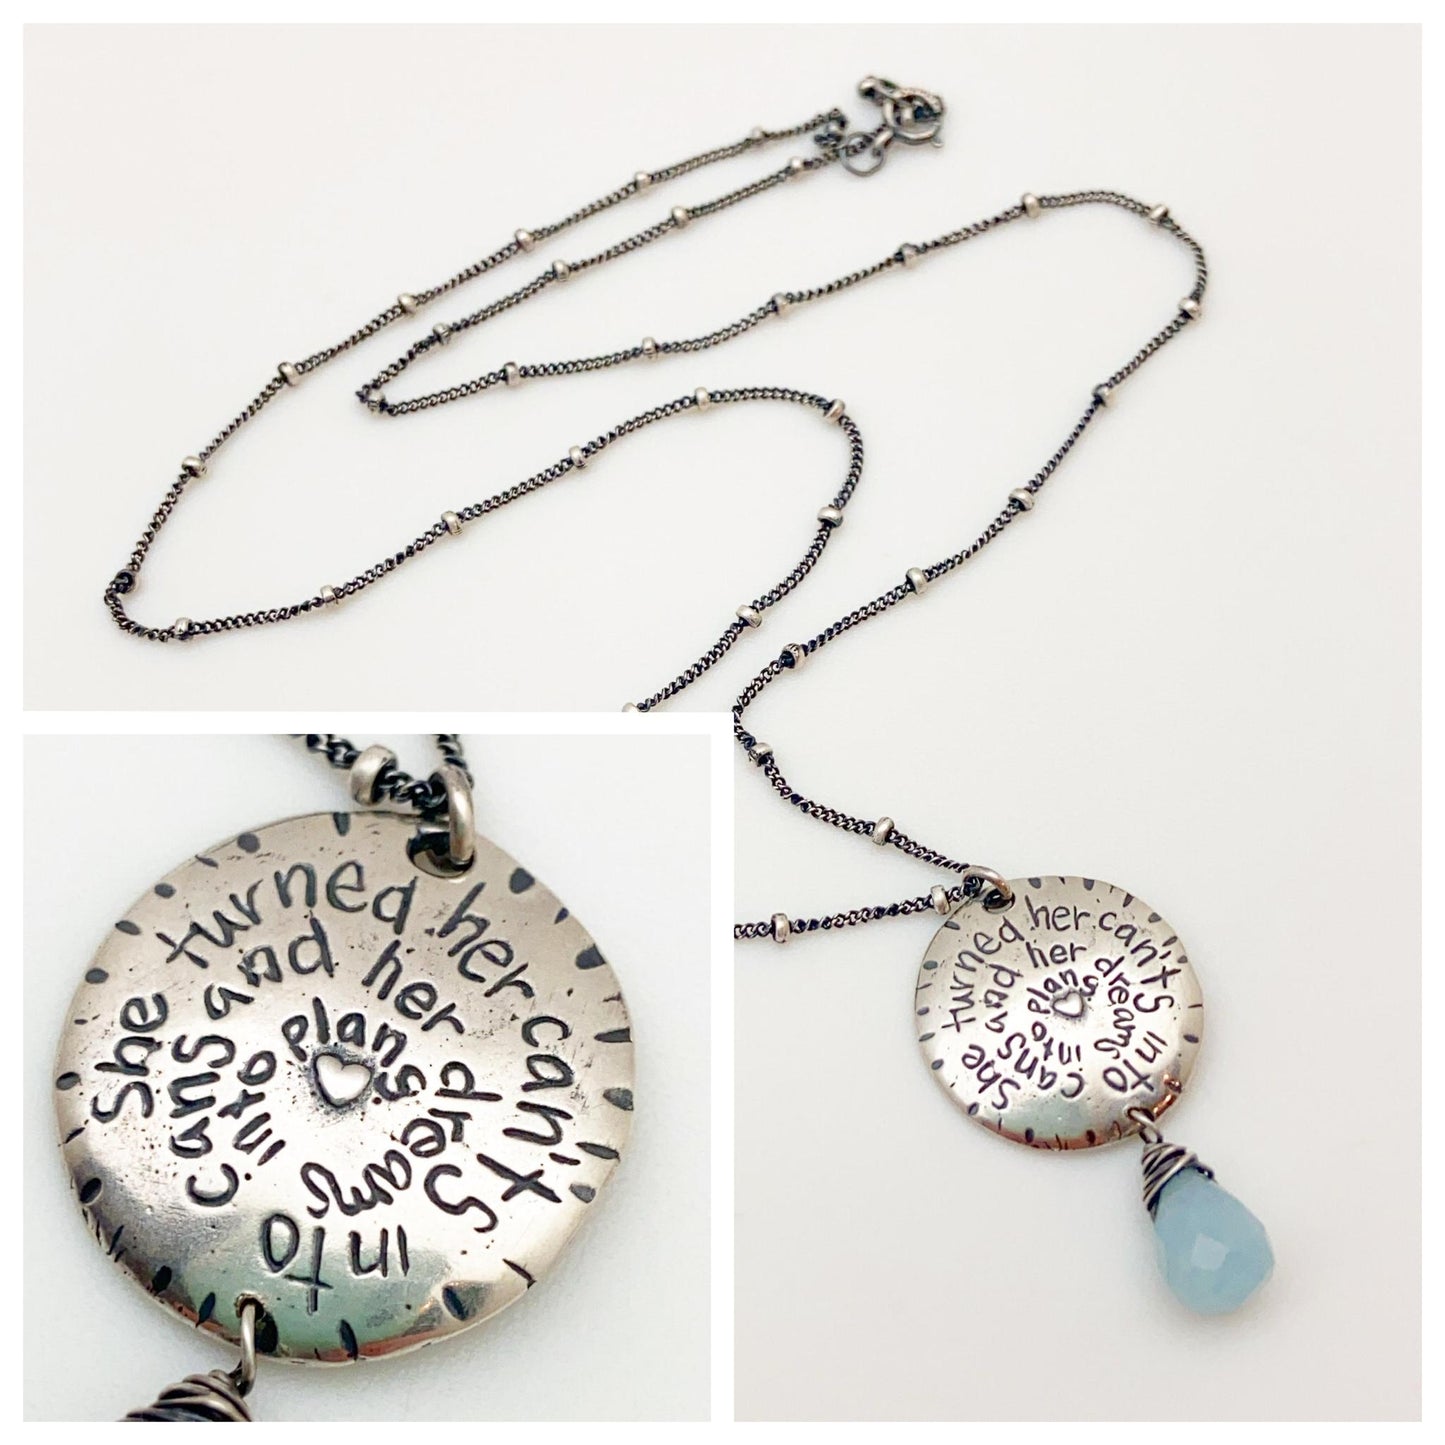 Necklace - "She turned her can't...dreams into plans." - Sterling